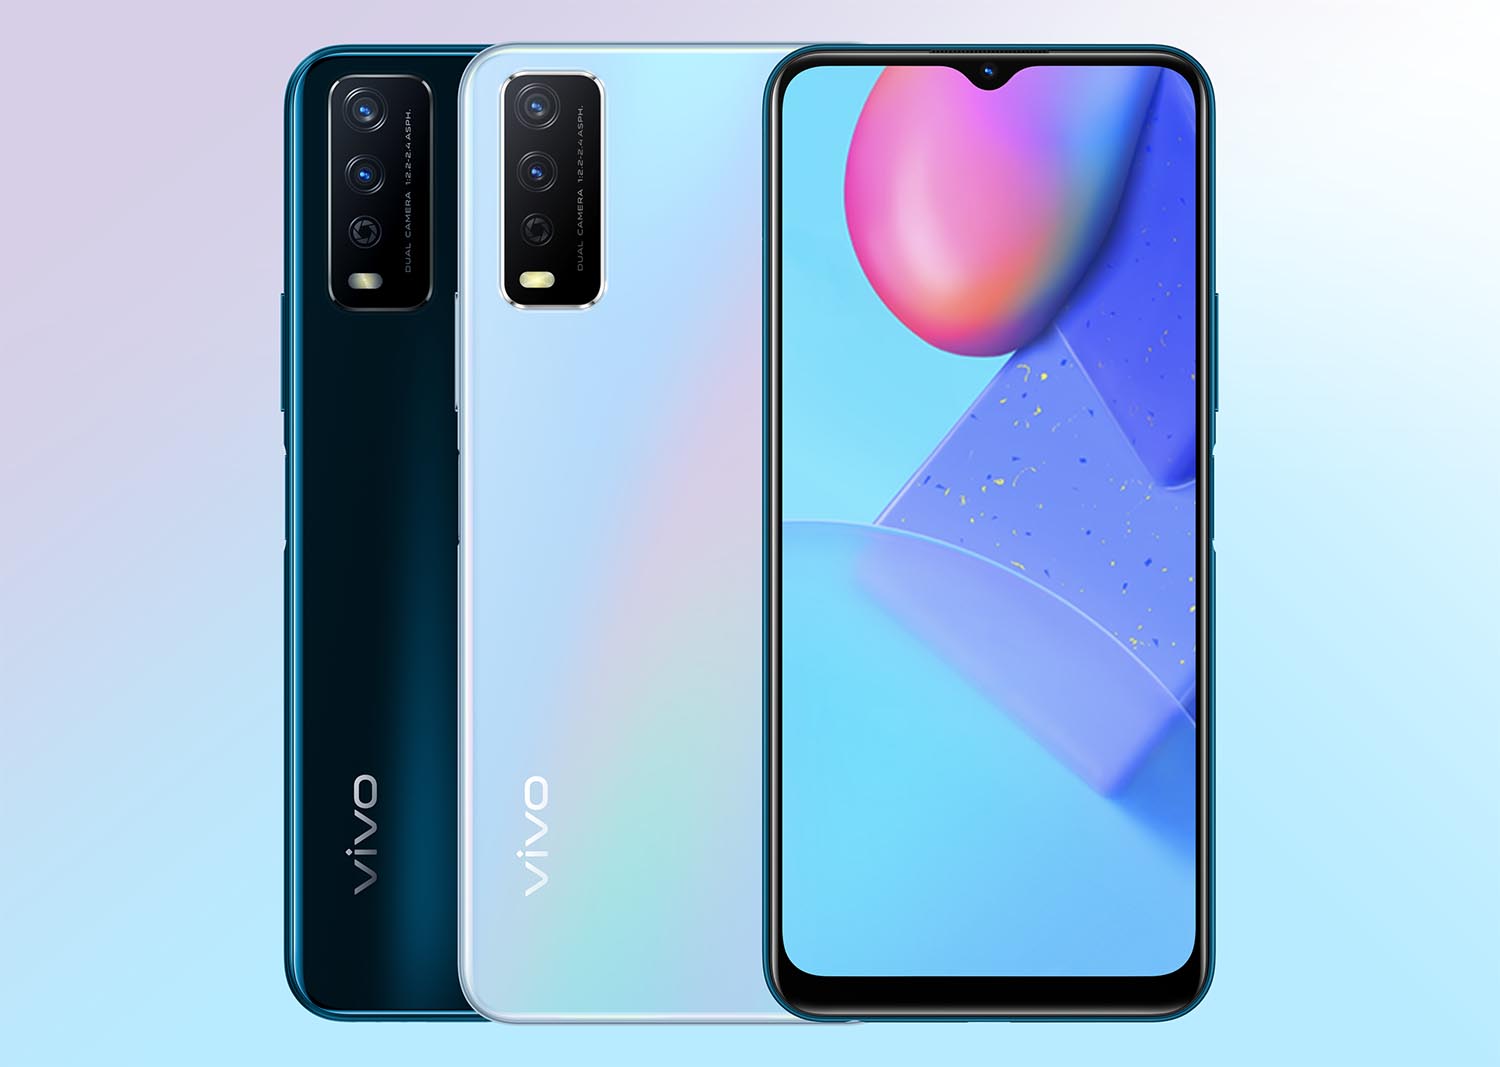 Stylish, powerful battery and other awesome features that you can expect from the new vivo Y12s